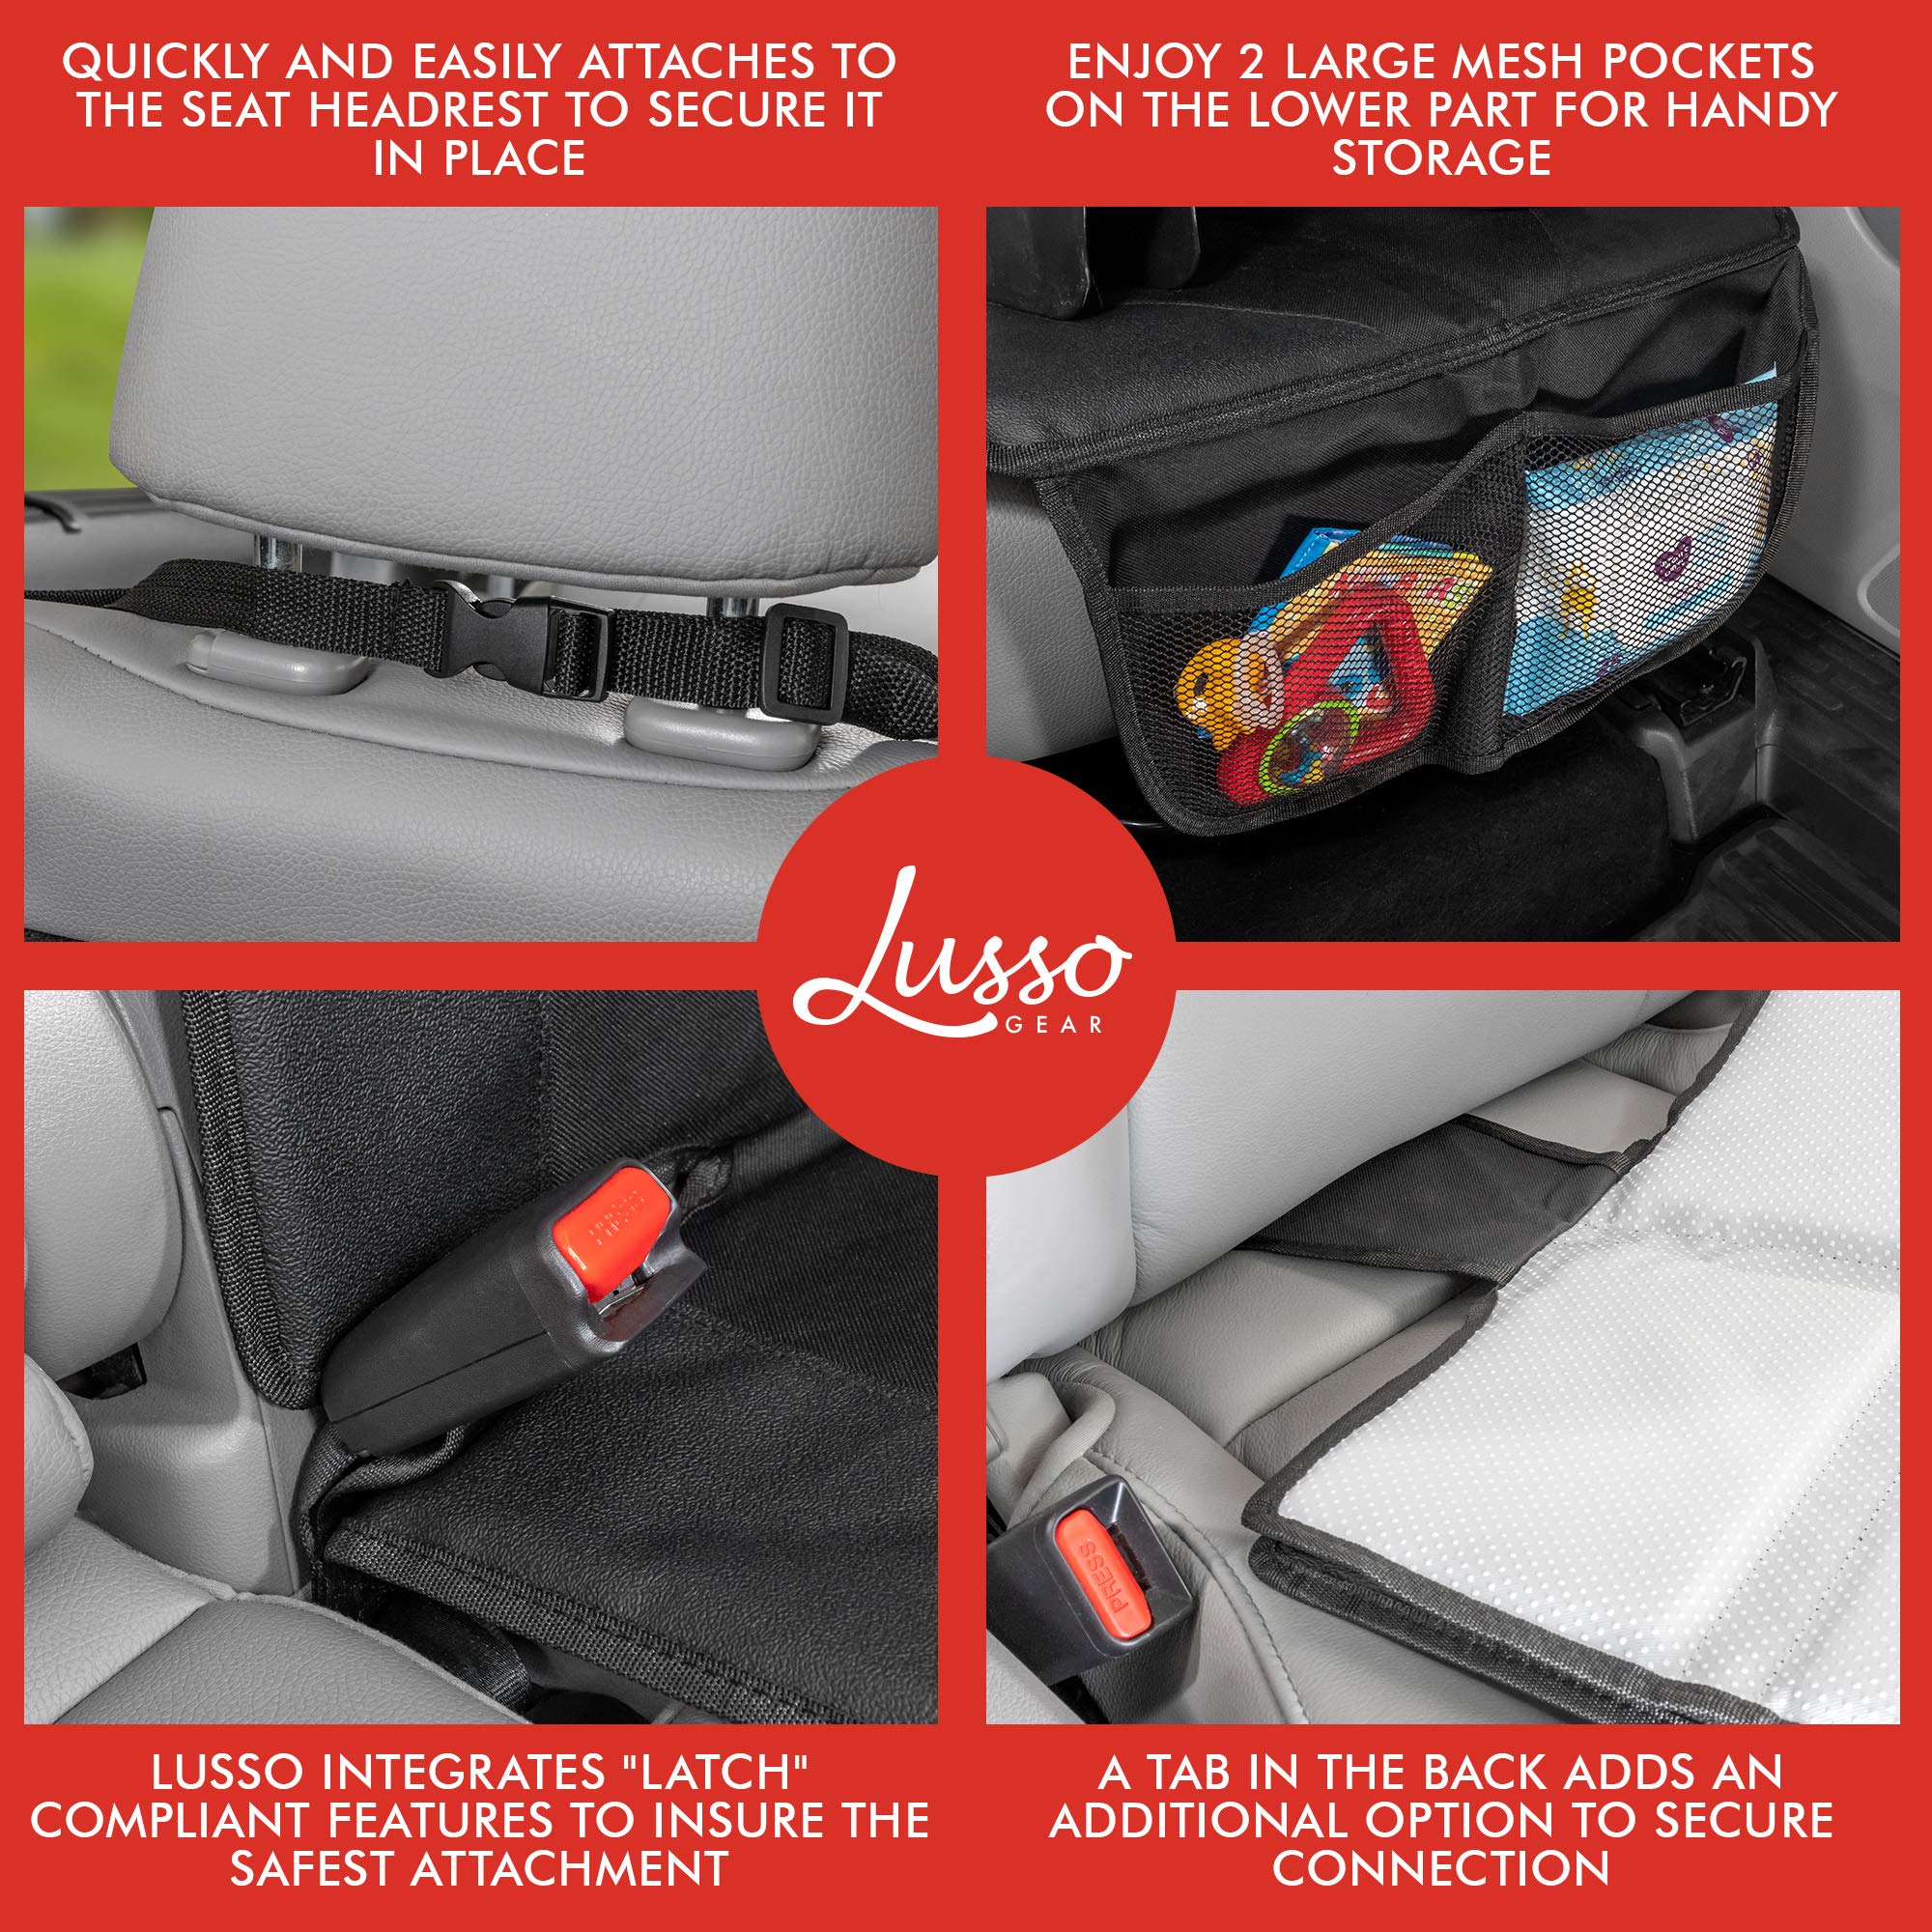 Lusso Gear Car Seat Protector (Gray) + Two Pack of Heavy Duty Kick Mats (Gray), Waterproof, Protects Fabric or Leather Seats, Premium Oxford Fabric, Travel Essentials